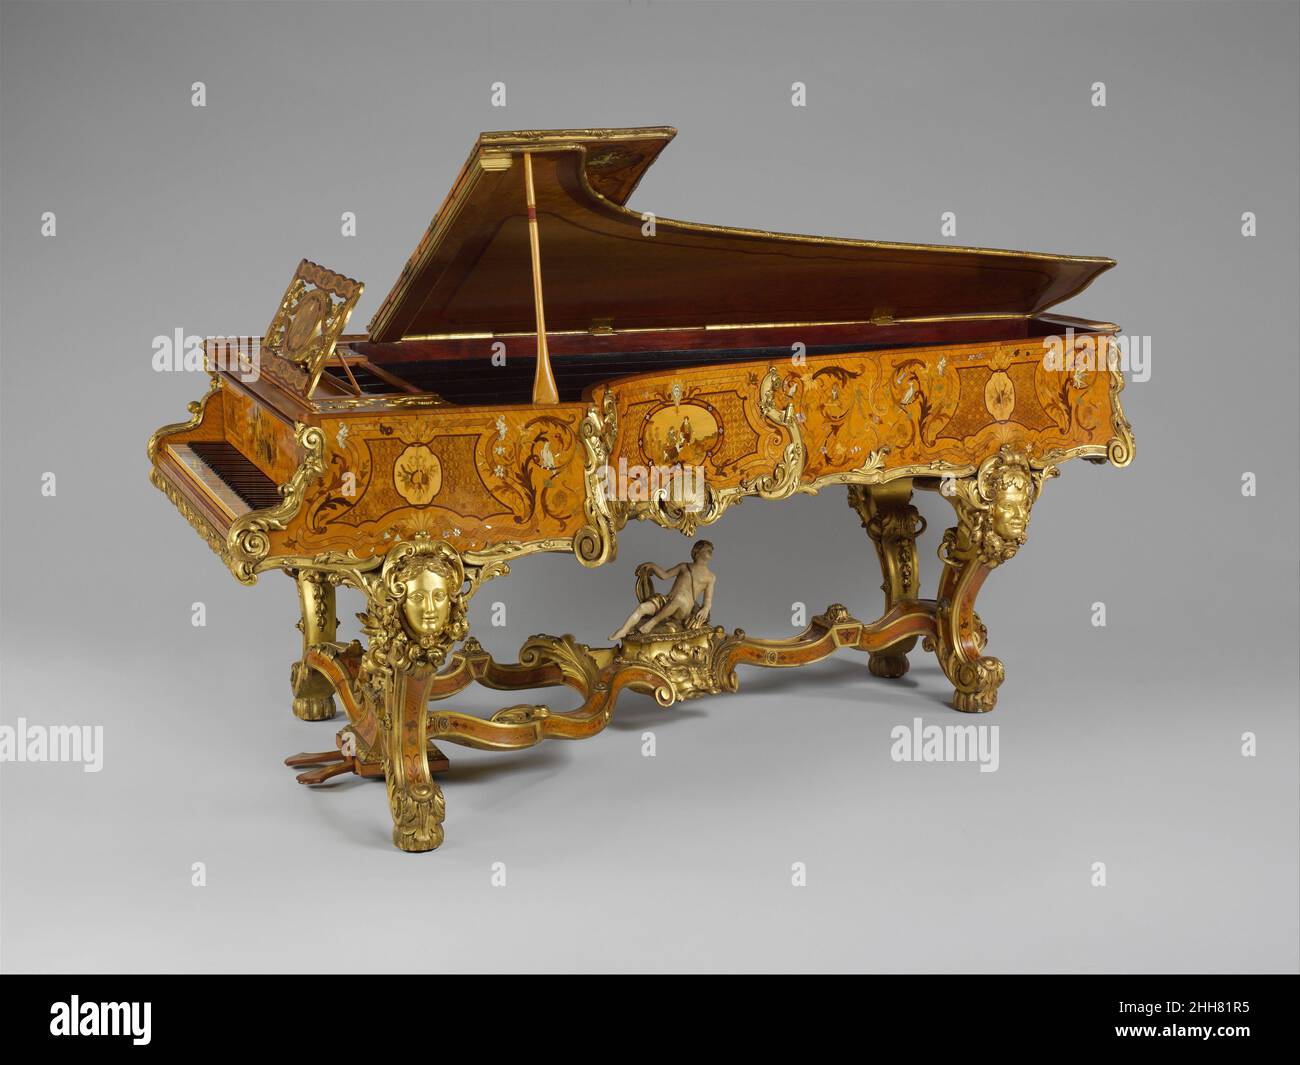 Grand Pianoforte ca. 1840 Érard This piano, featuring an extraordinary marquetry satinwood case designed by George Henry Blake, is one of the most elaborately decorated instruments of the nineteenth century. It was commissioned from the London branch of the distinguished French firm of Érard by Thomas Henry Foley, Baron of Kidderminster, for Witley Court, his residence near Herefordshire and Worcestershire. The decorative program of the piano consists of mythological personages, references to the Foley family, and symols related to music-making and musical instruments. The piano case features Stock Photo